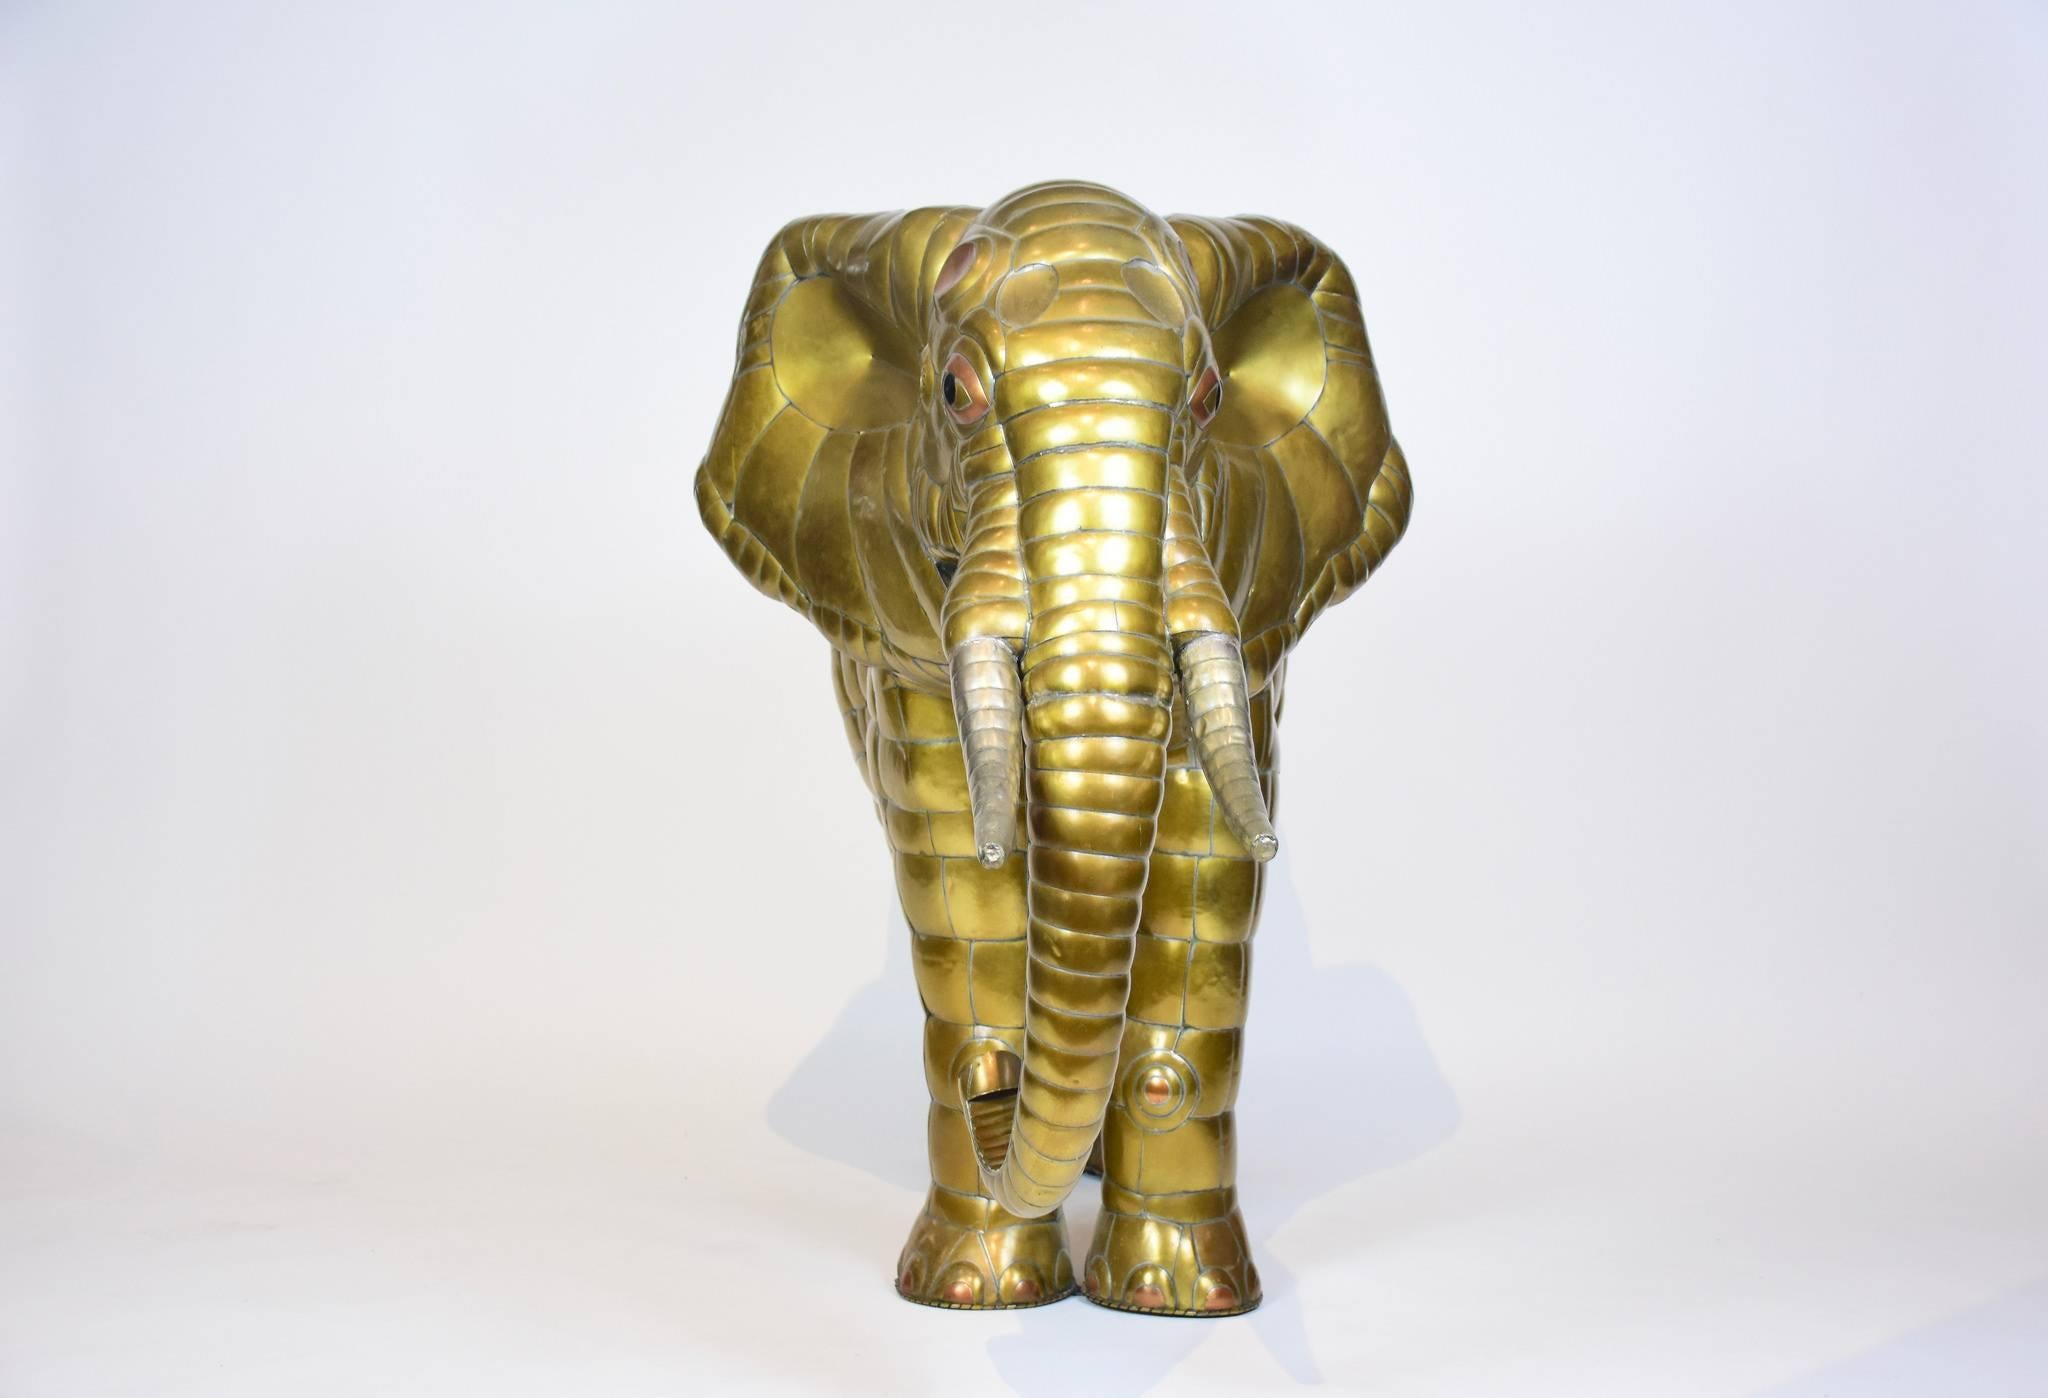 Elephant sculpture in patchwork brass and copper by acclaimed Mexican artist and sculptor, Sergio Bustamante. This was done in the late 1970s. Tons of handcrafted detail which defines this piece.